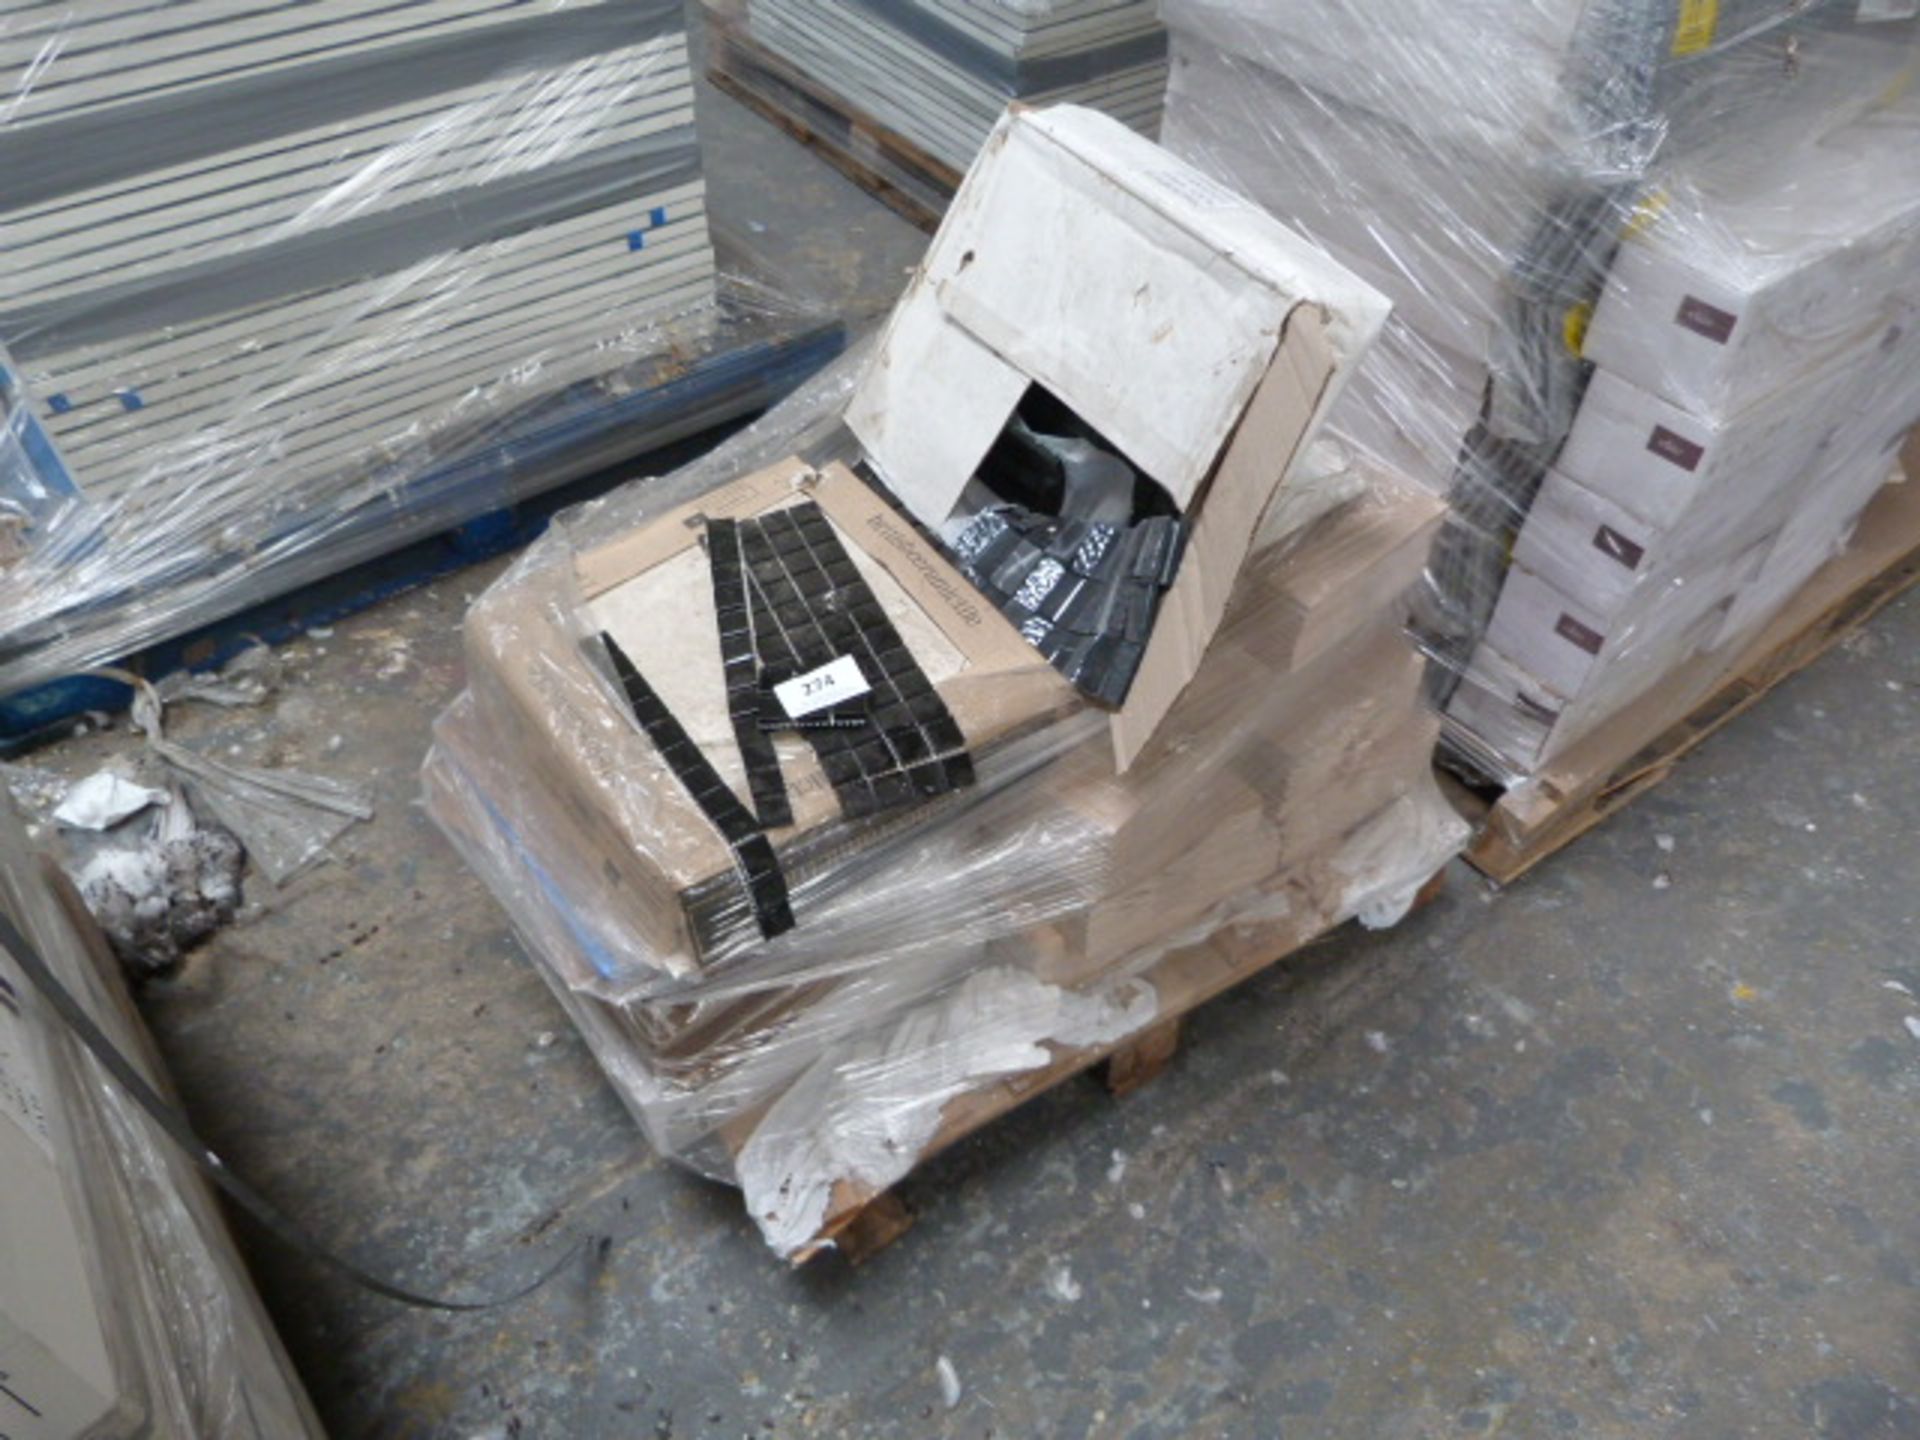 *Pallet of Mixed Mosaic & Other Tiles